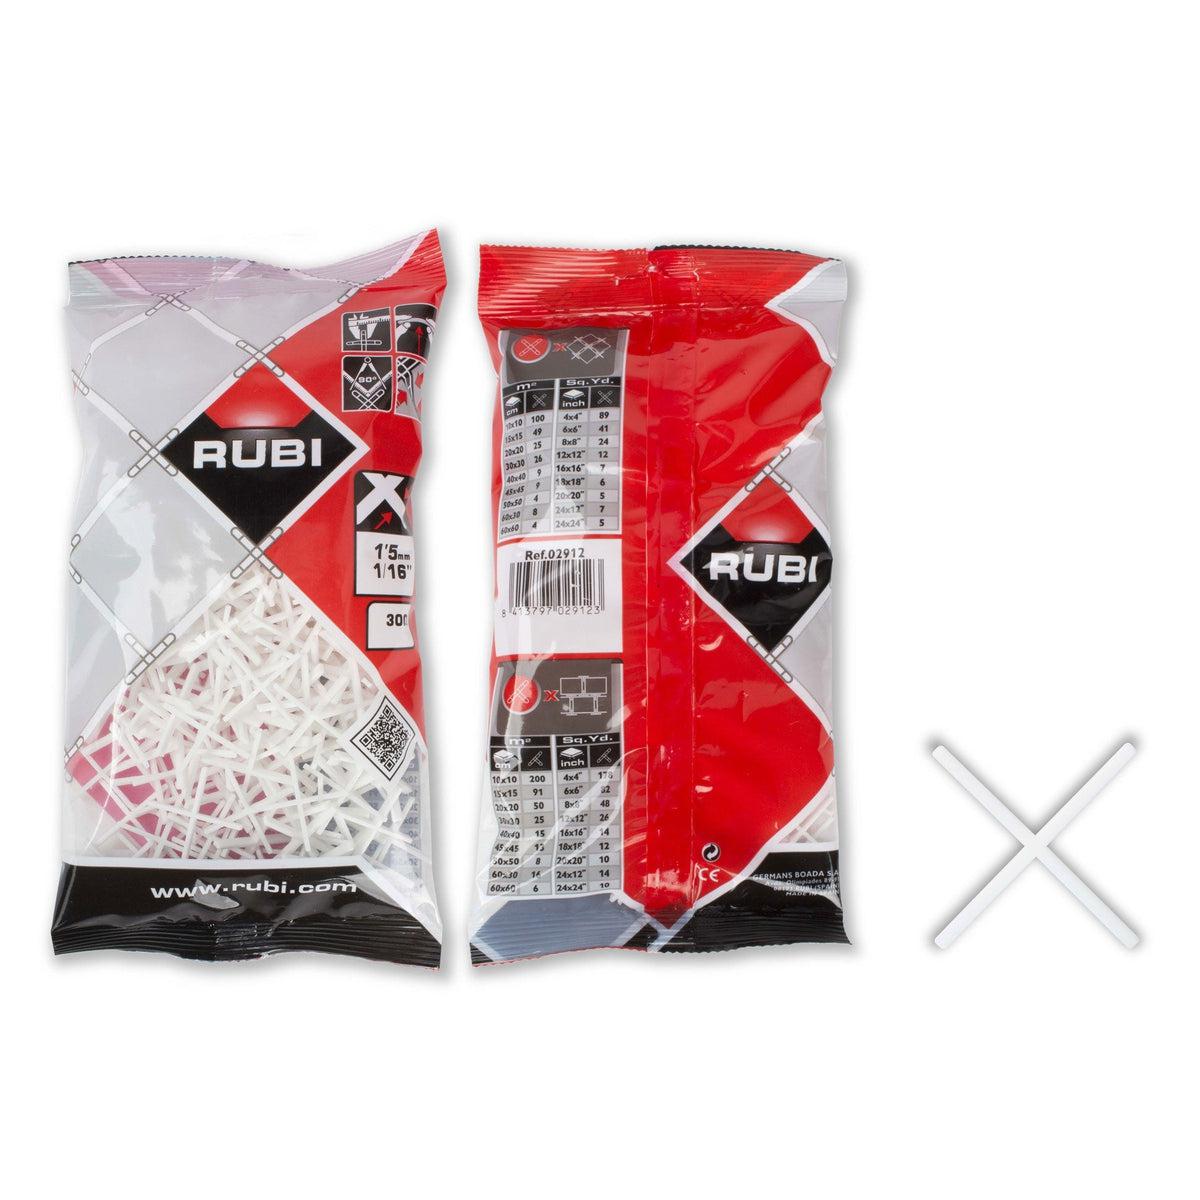 RUBI Tools Tile Spacers for Joints 1/16" - 300pcs